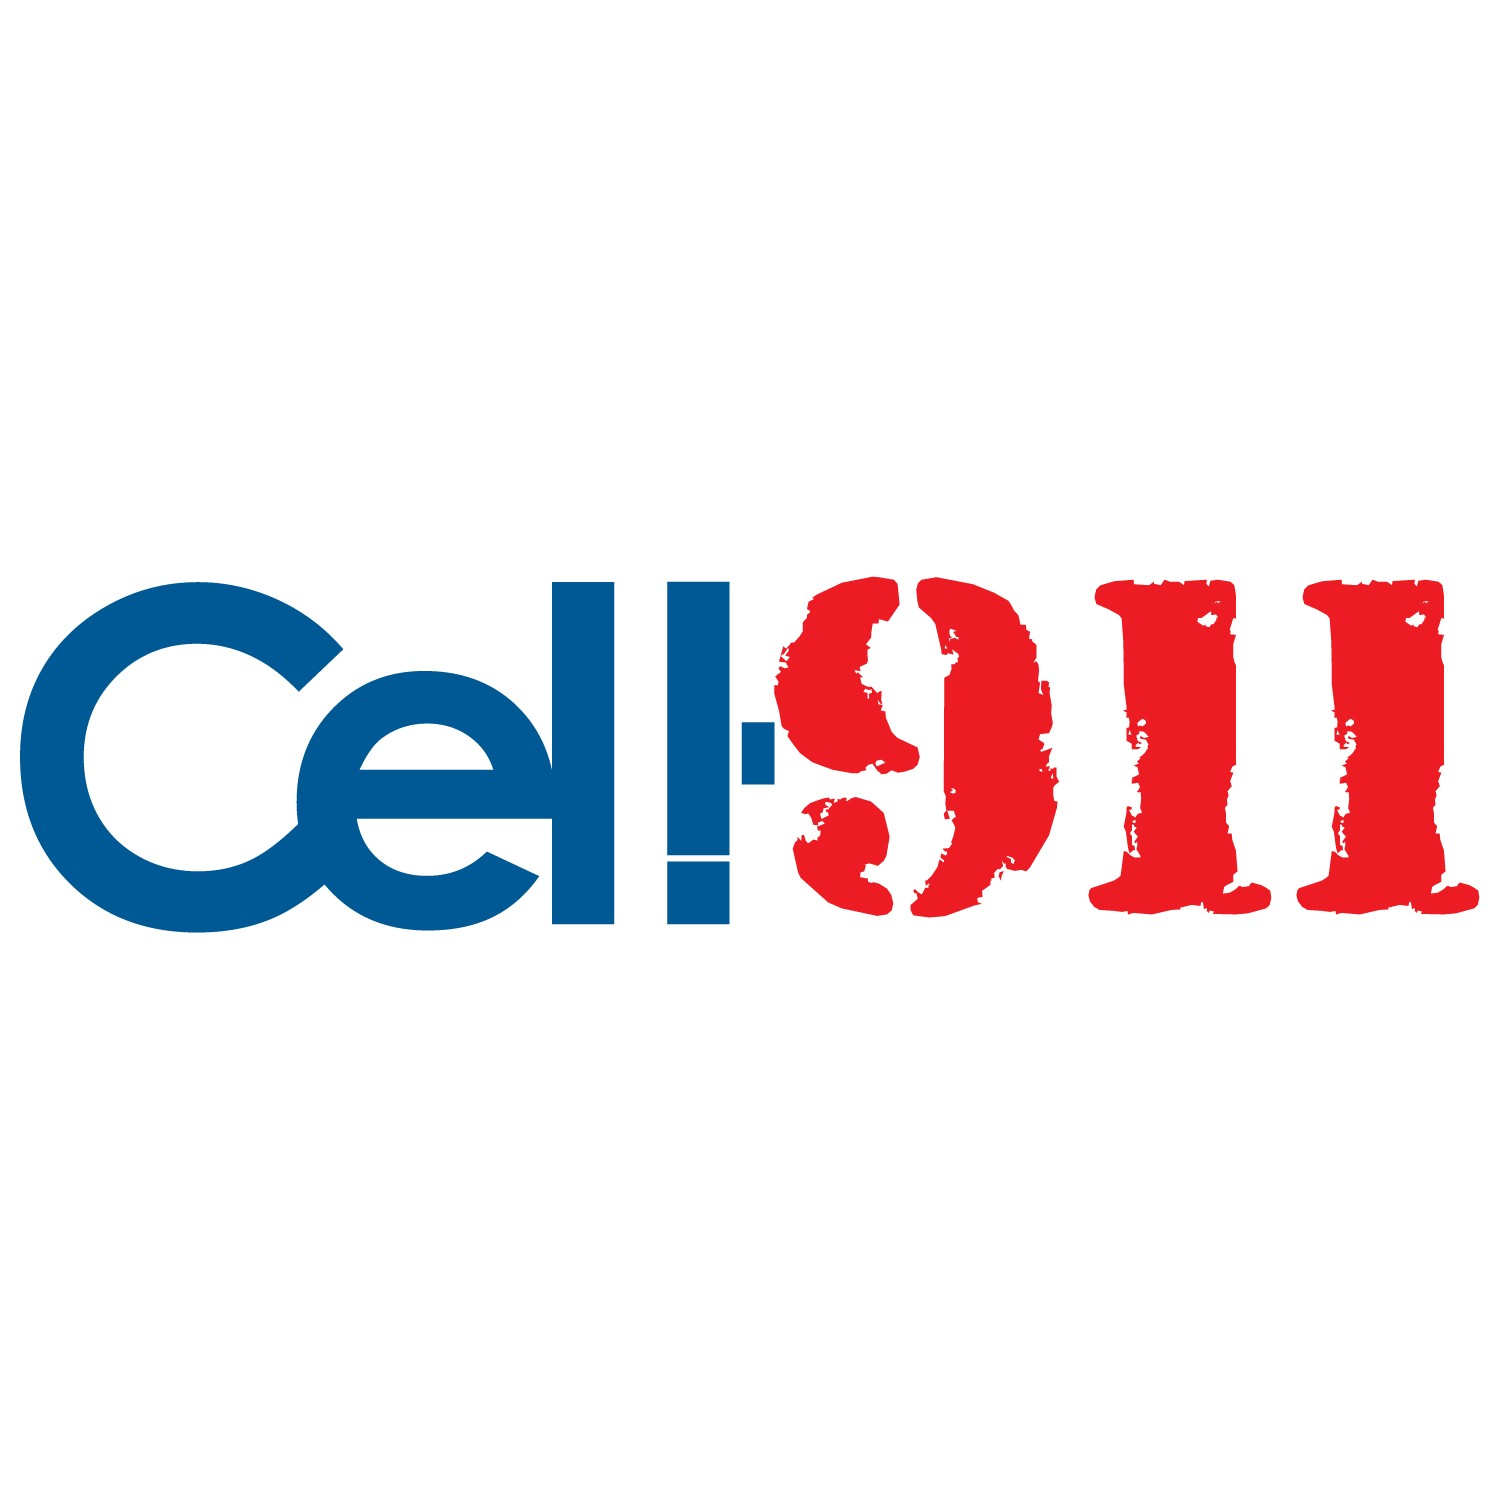 Cell-911